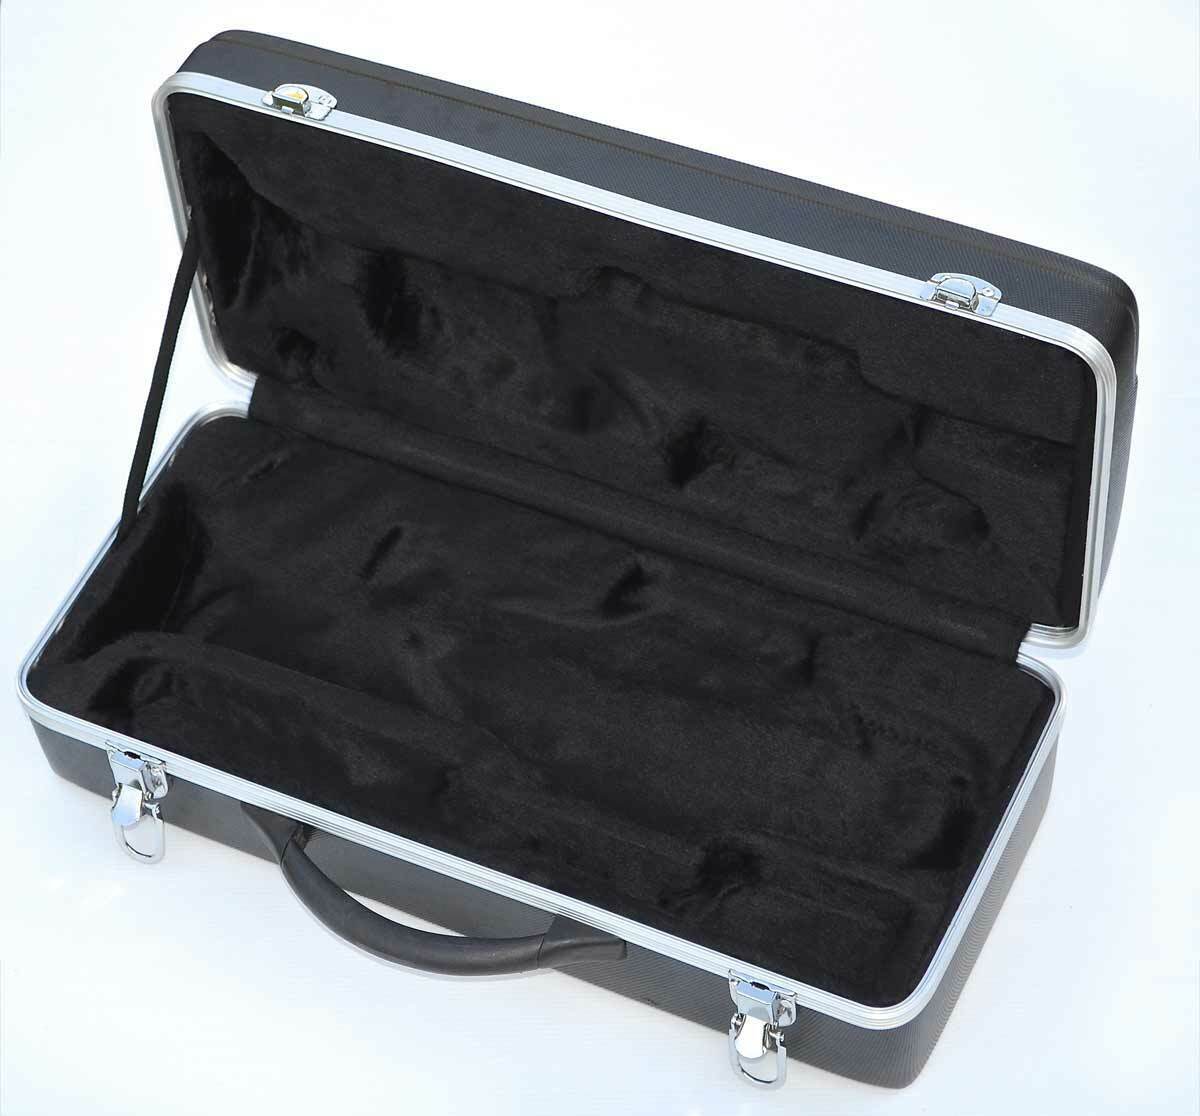 New Durable Lightweight Hard Shell Bb Trumpet Case For Standard Size Trumpets